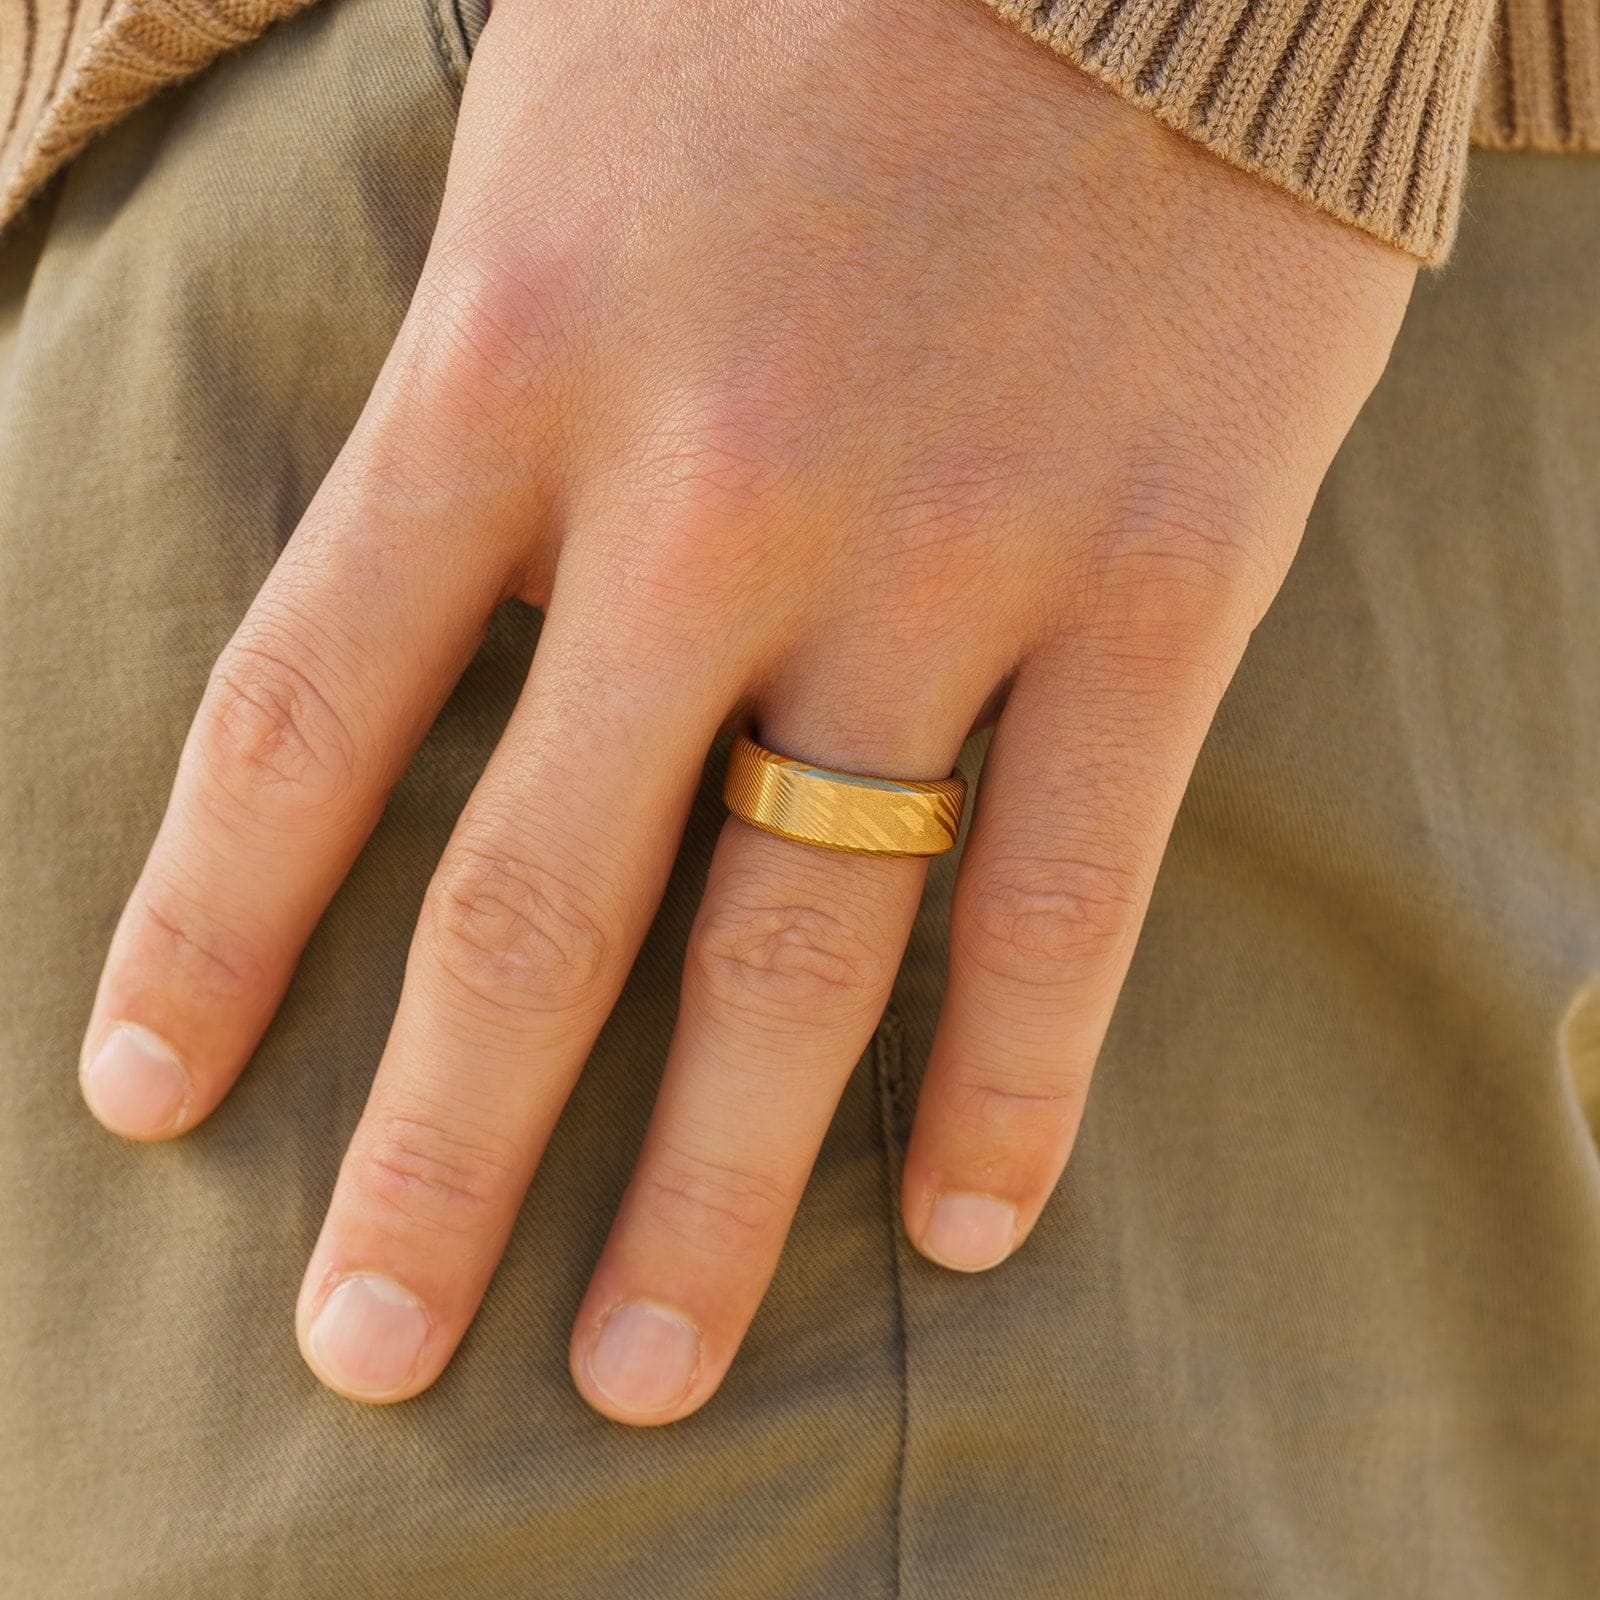 Durable gold men's ring modeled on male hand